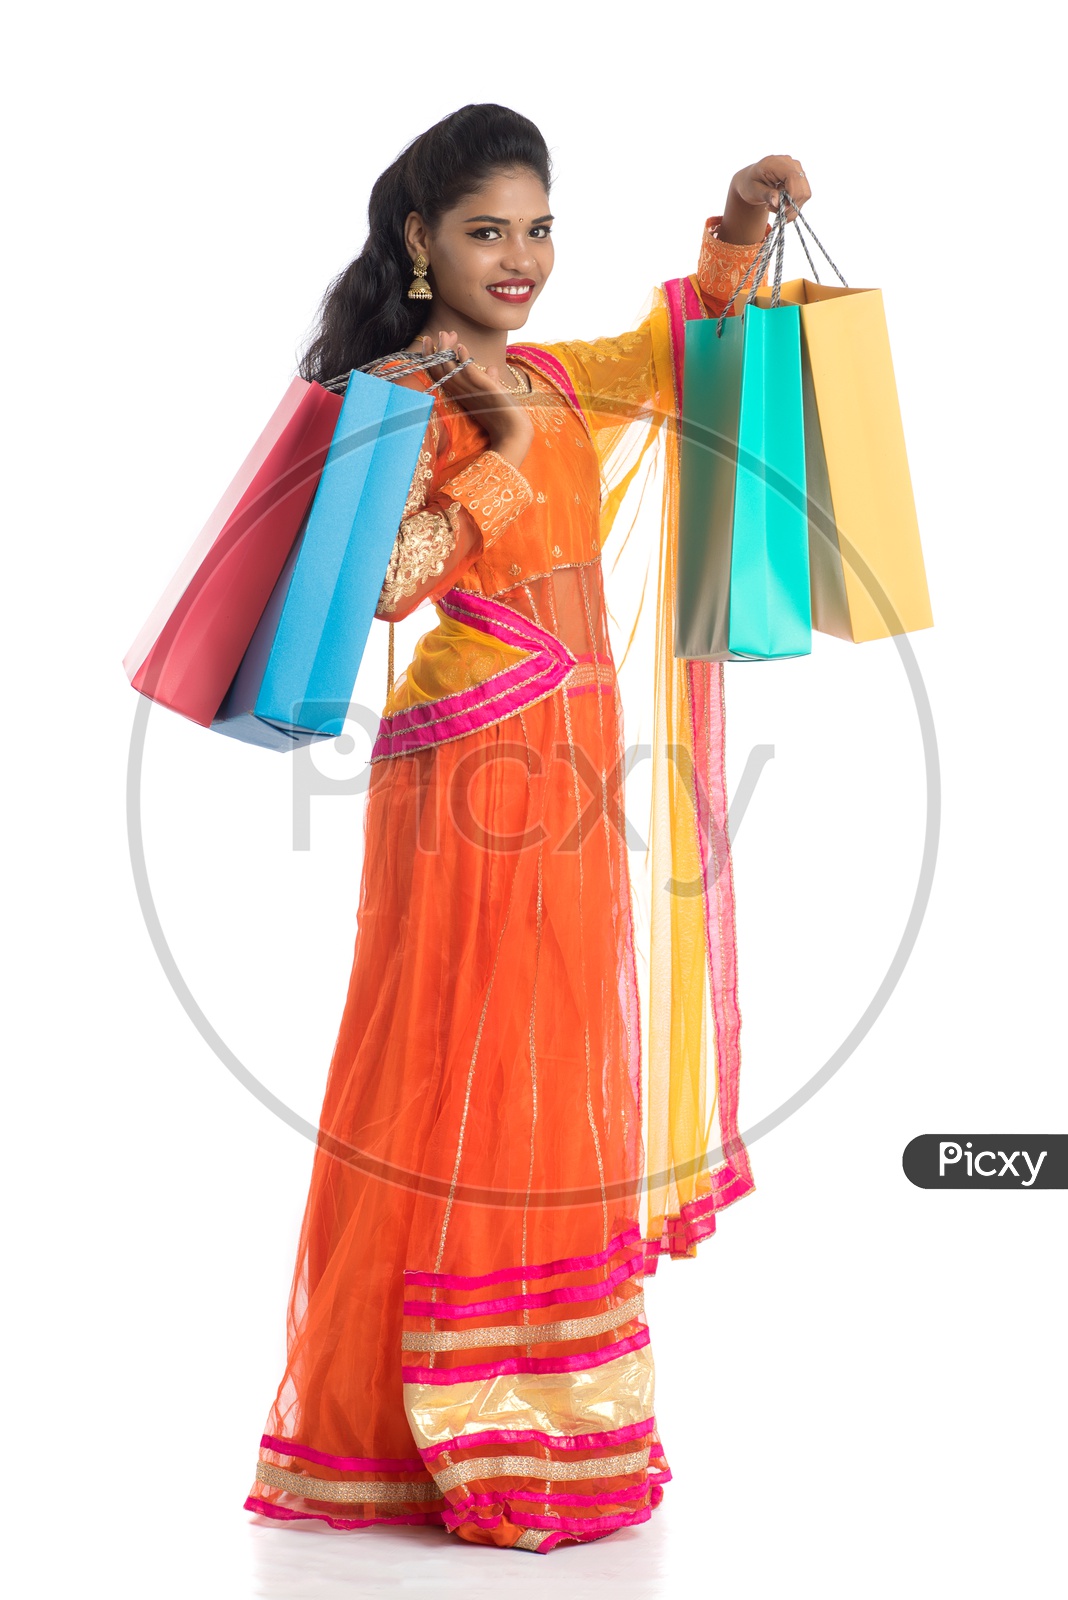 Young Indian Traditional  Girl Holding Shopping Bags Or Festival Shopping Bags And Posing On an Isolated White Background